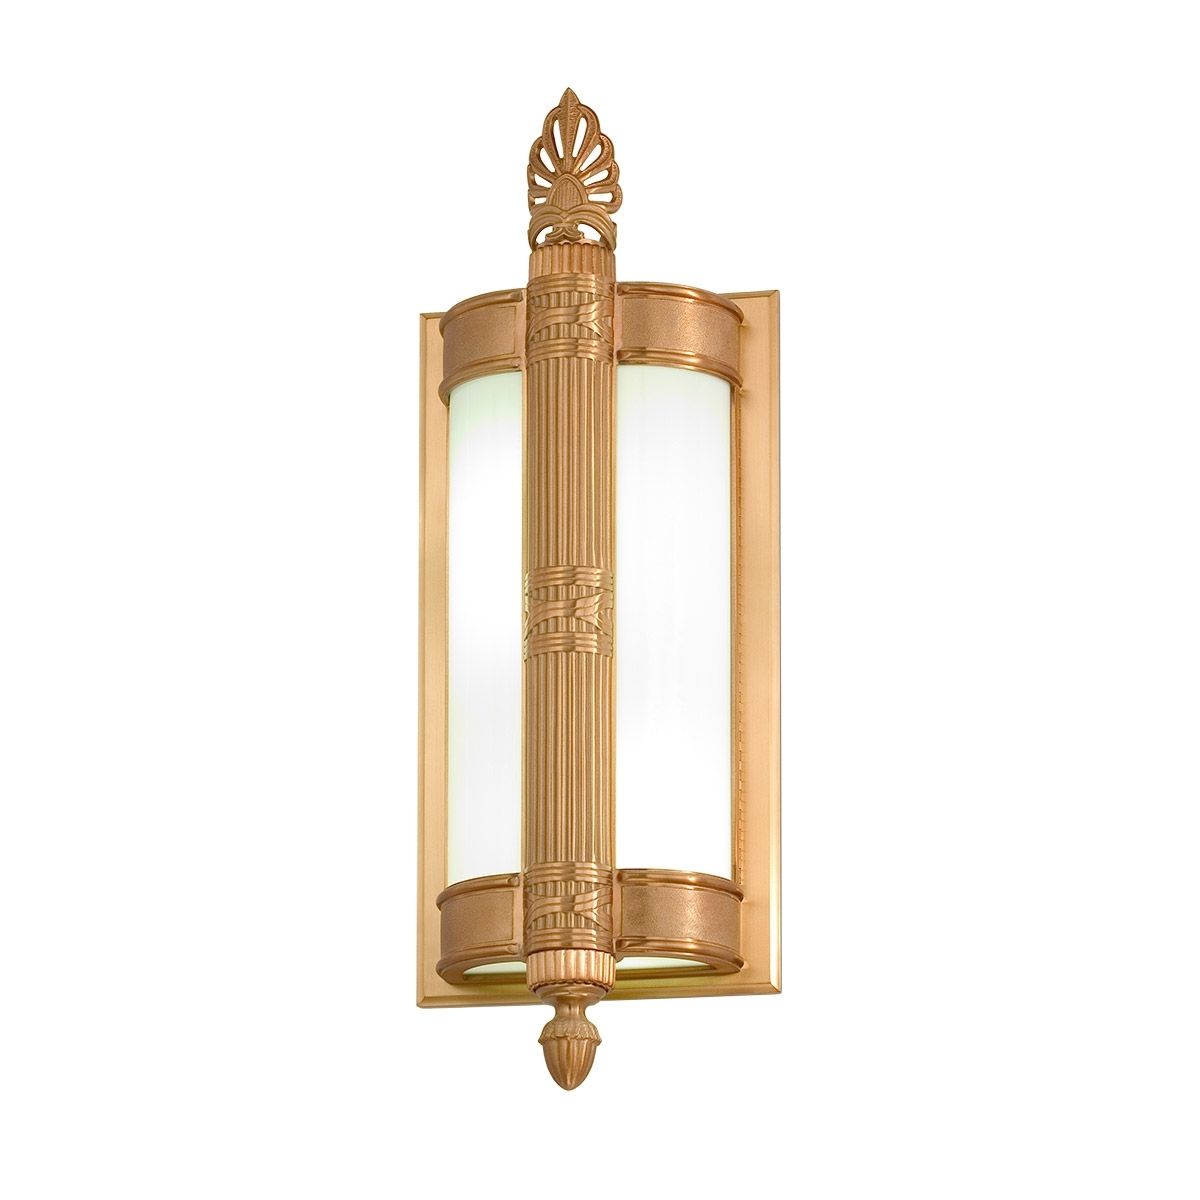 Ada Art Deco Wall Sconce | Crenshaw Lighting For Art Deco Wall Sconces (View 10 of 20)